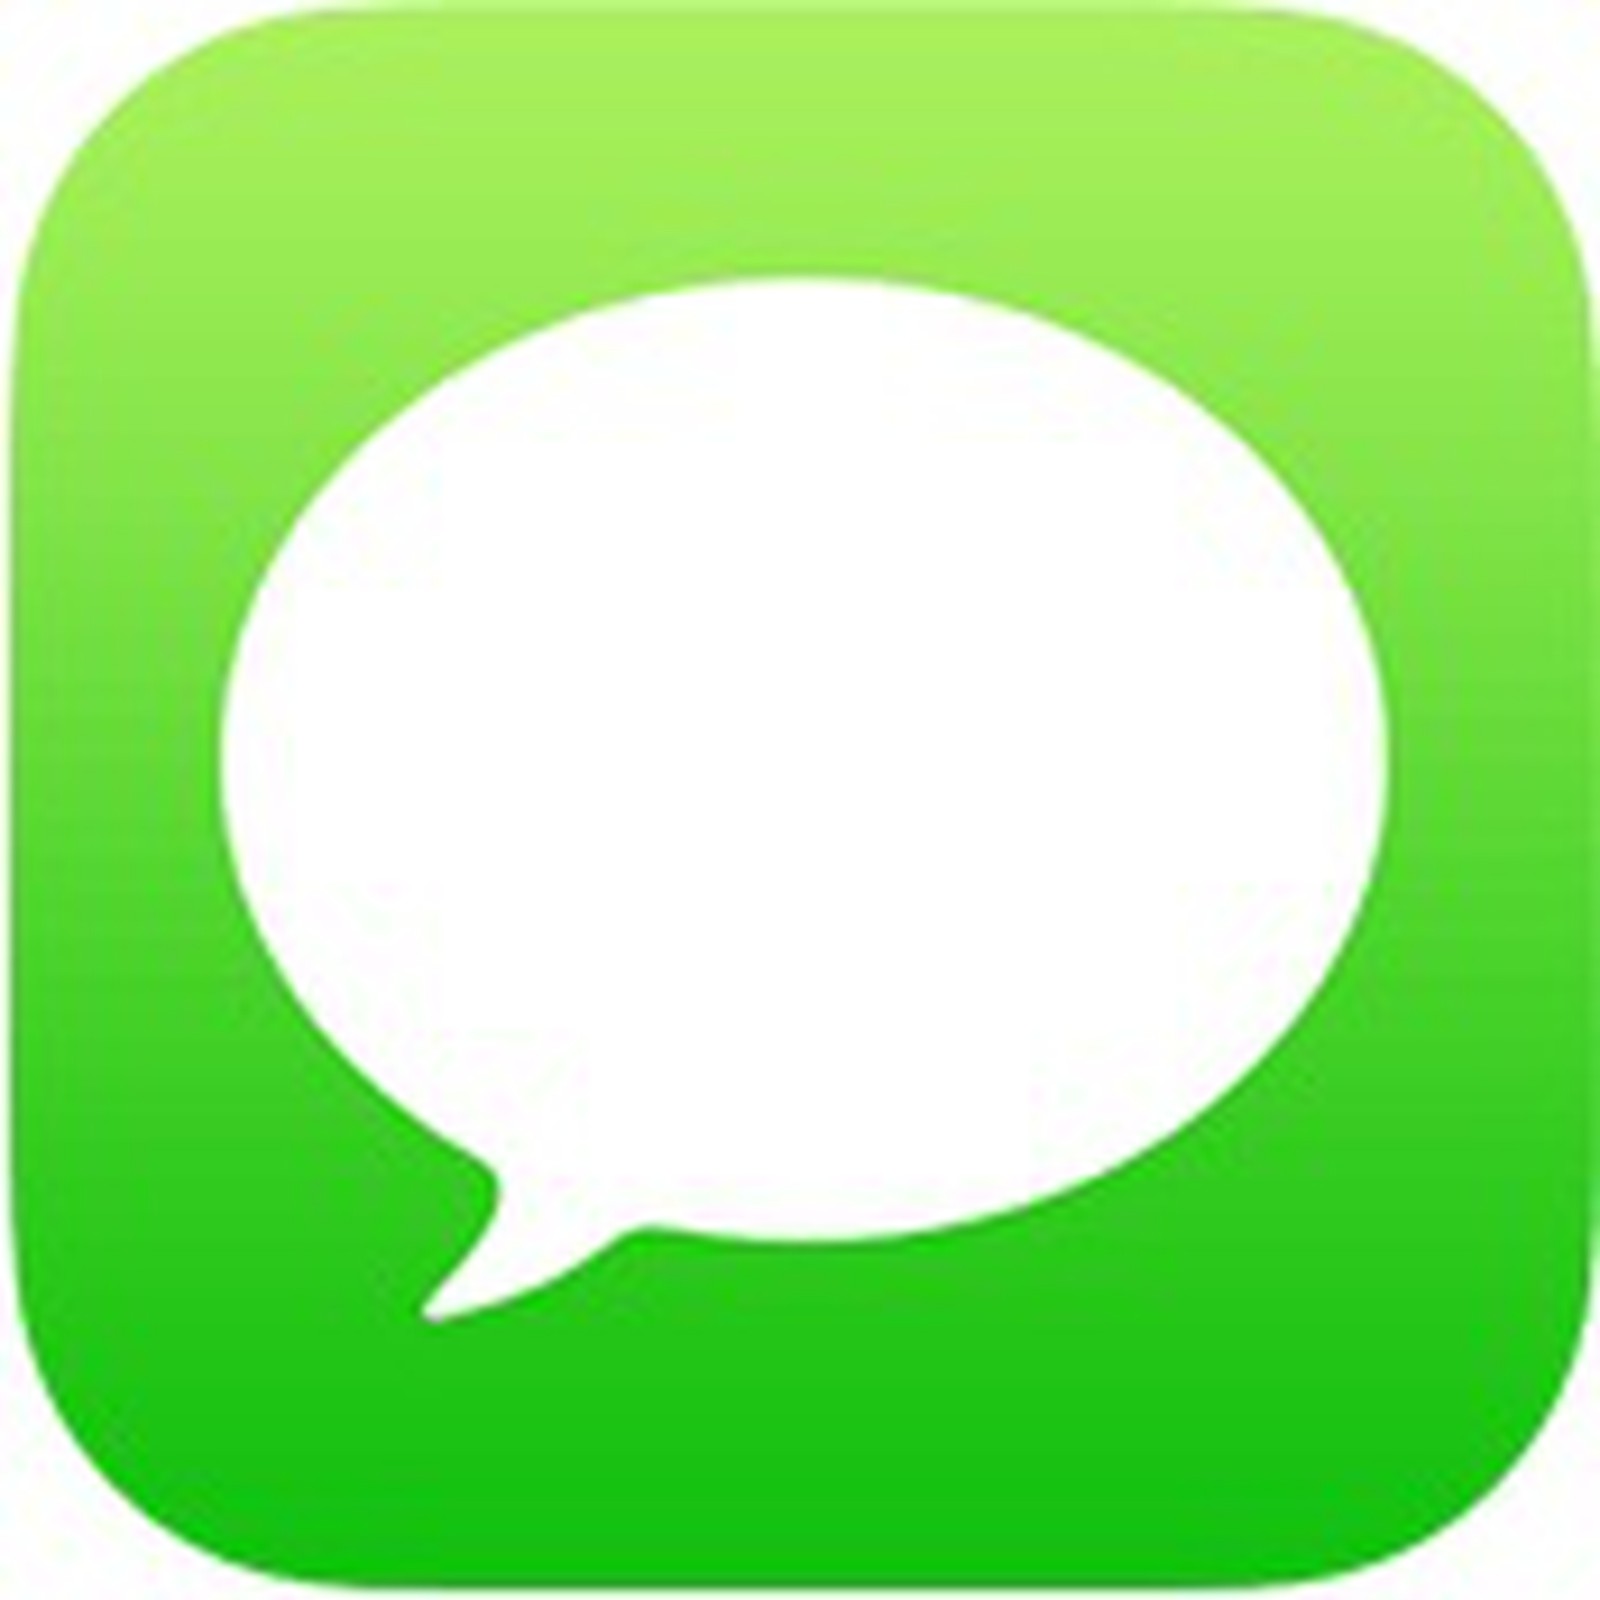 Apple Says iMessage Interception Would Require Re-Engineering Systems